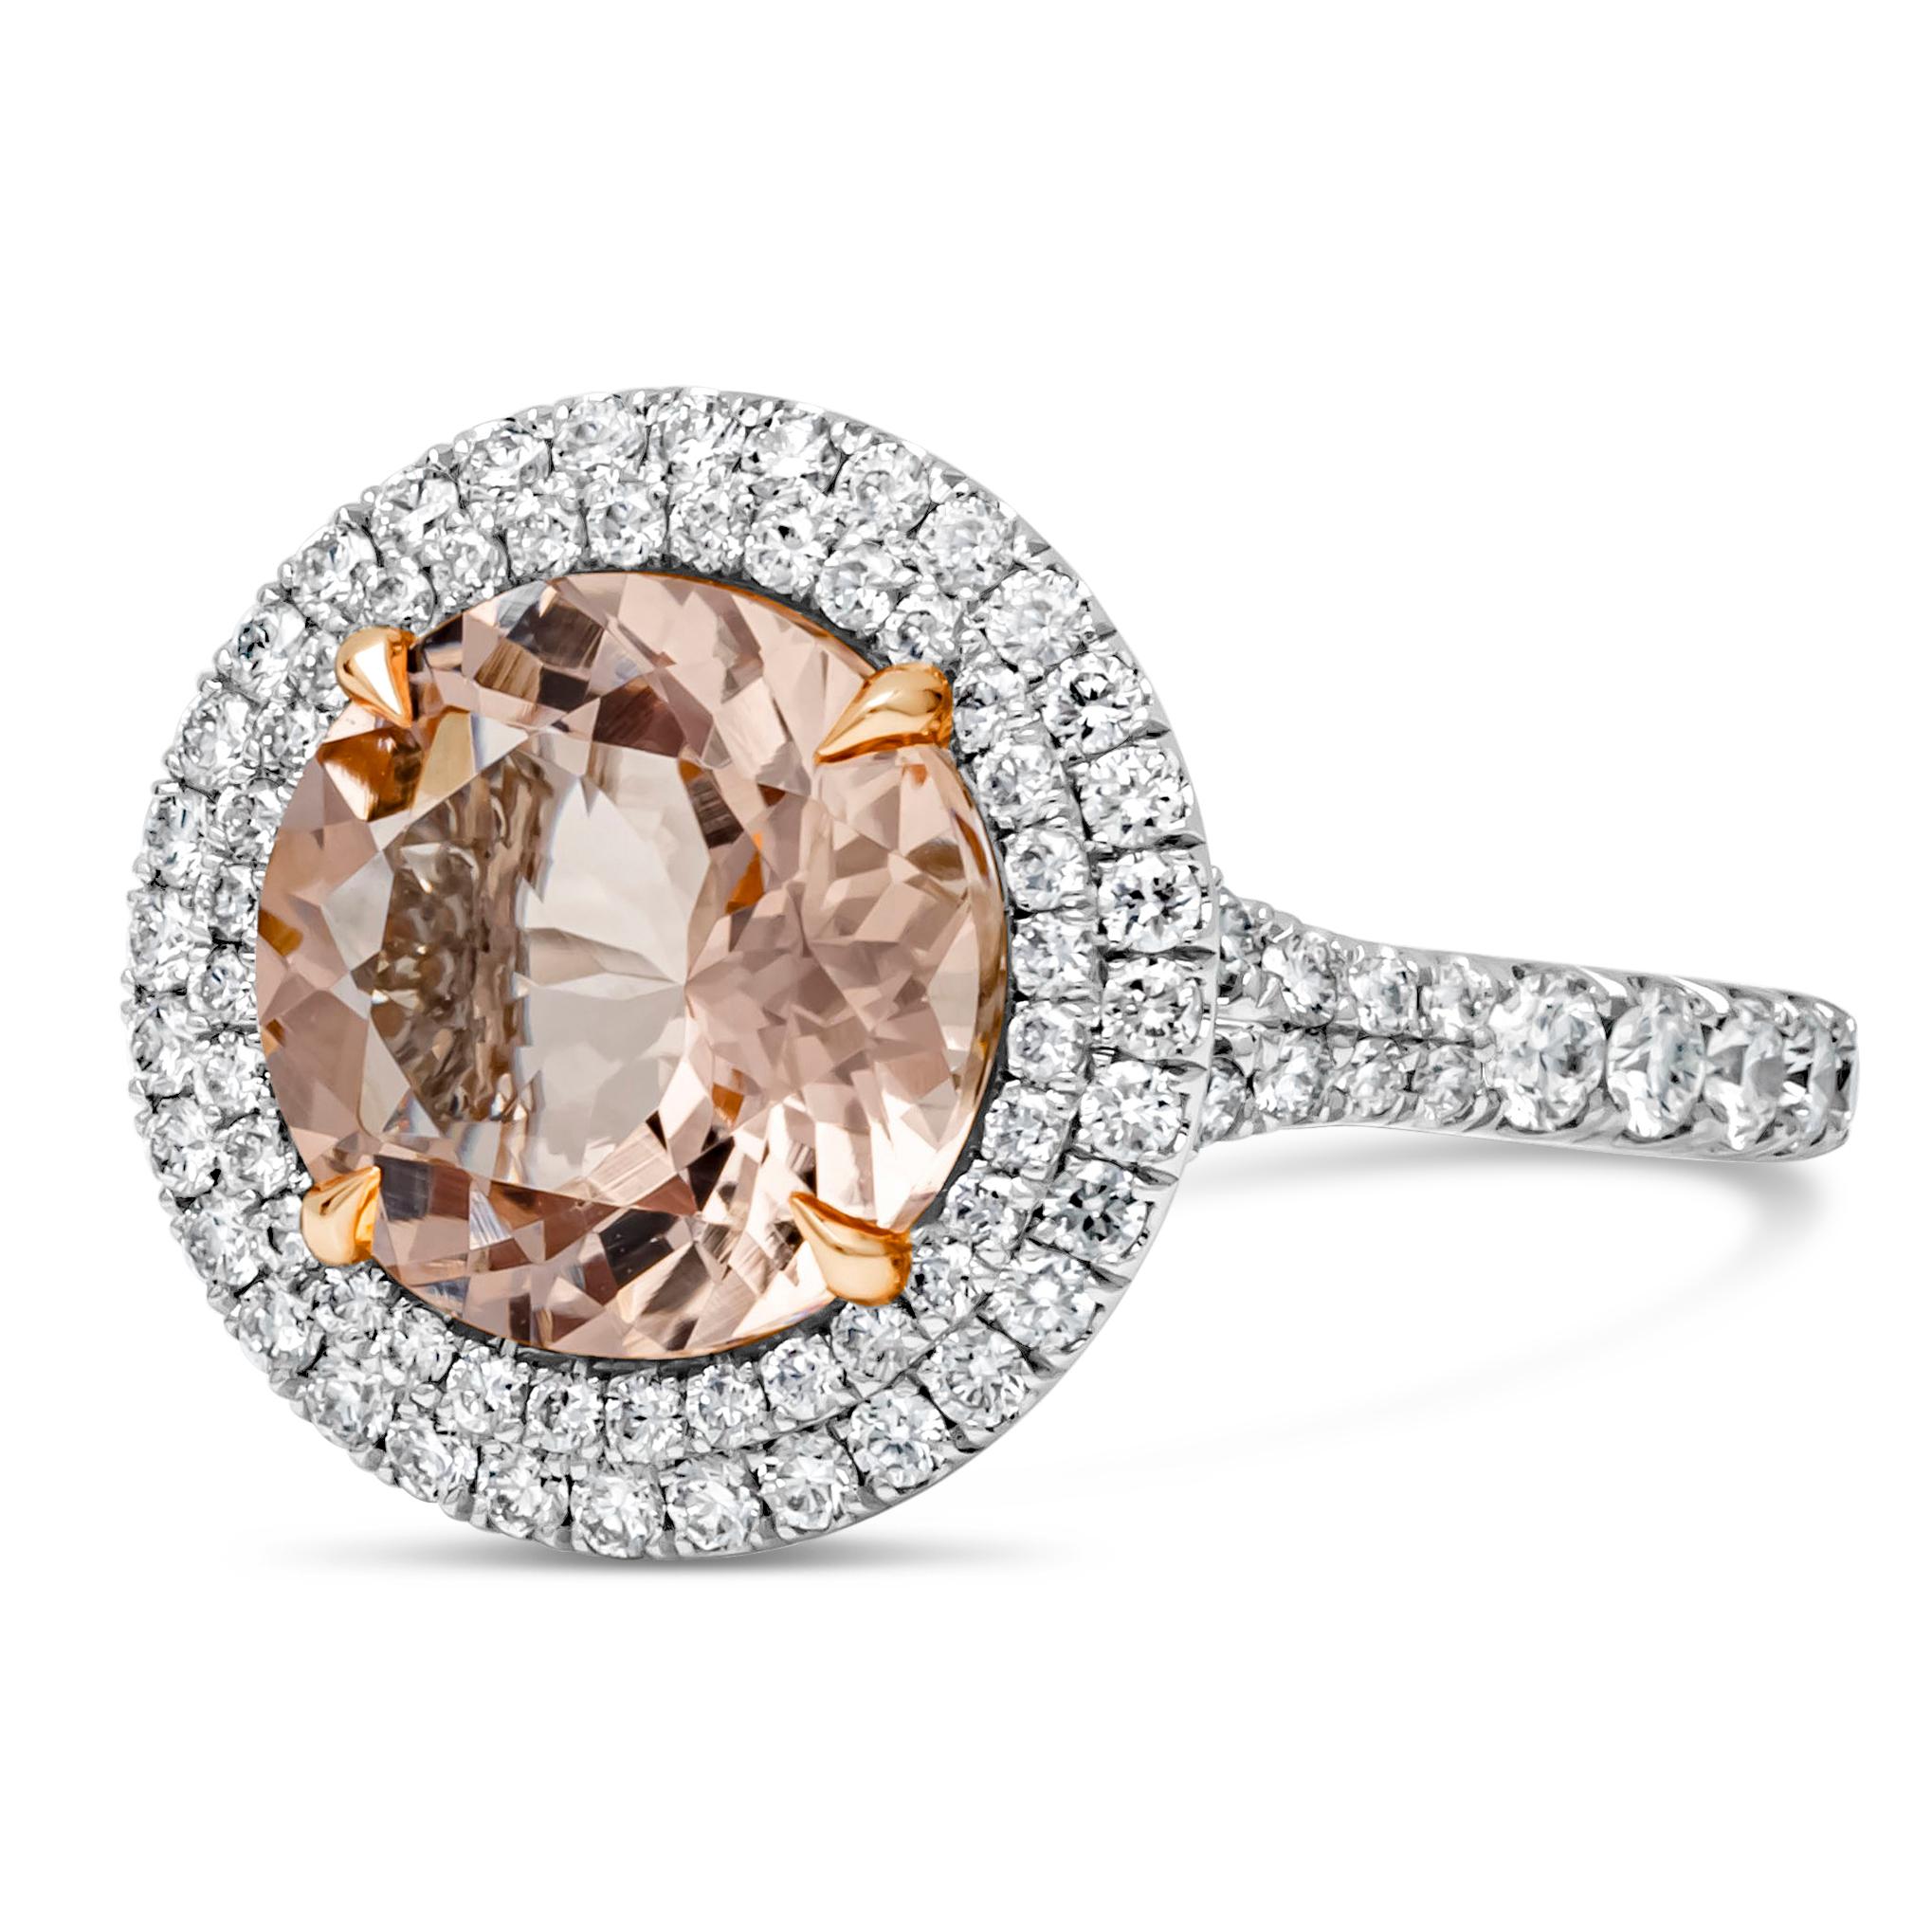 Features a 3.01 carats brilliant round morganite, set in a classic four prong basket setting and surrounded by two rows of round brilliant diamonds in a halo design. Set in a platinum mounting accented with diamonds. Total weight of diamonds is 1.03